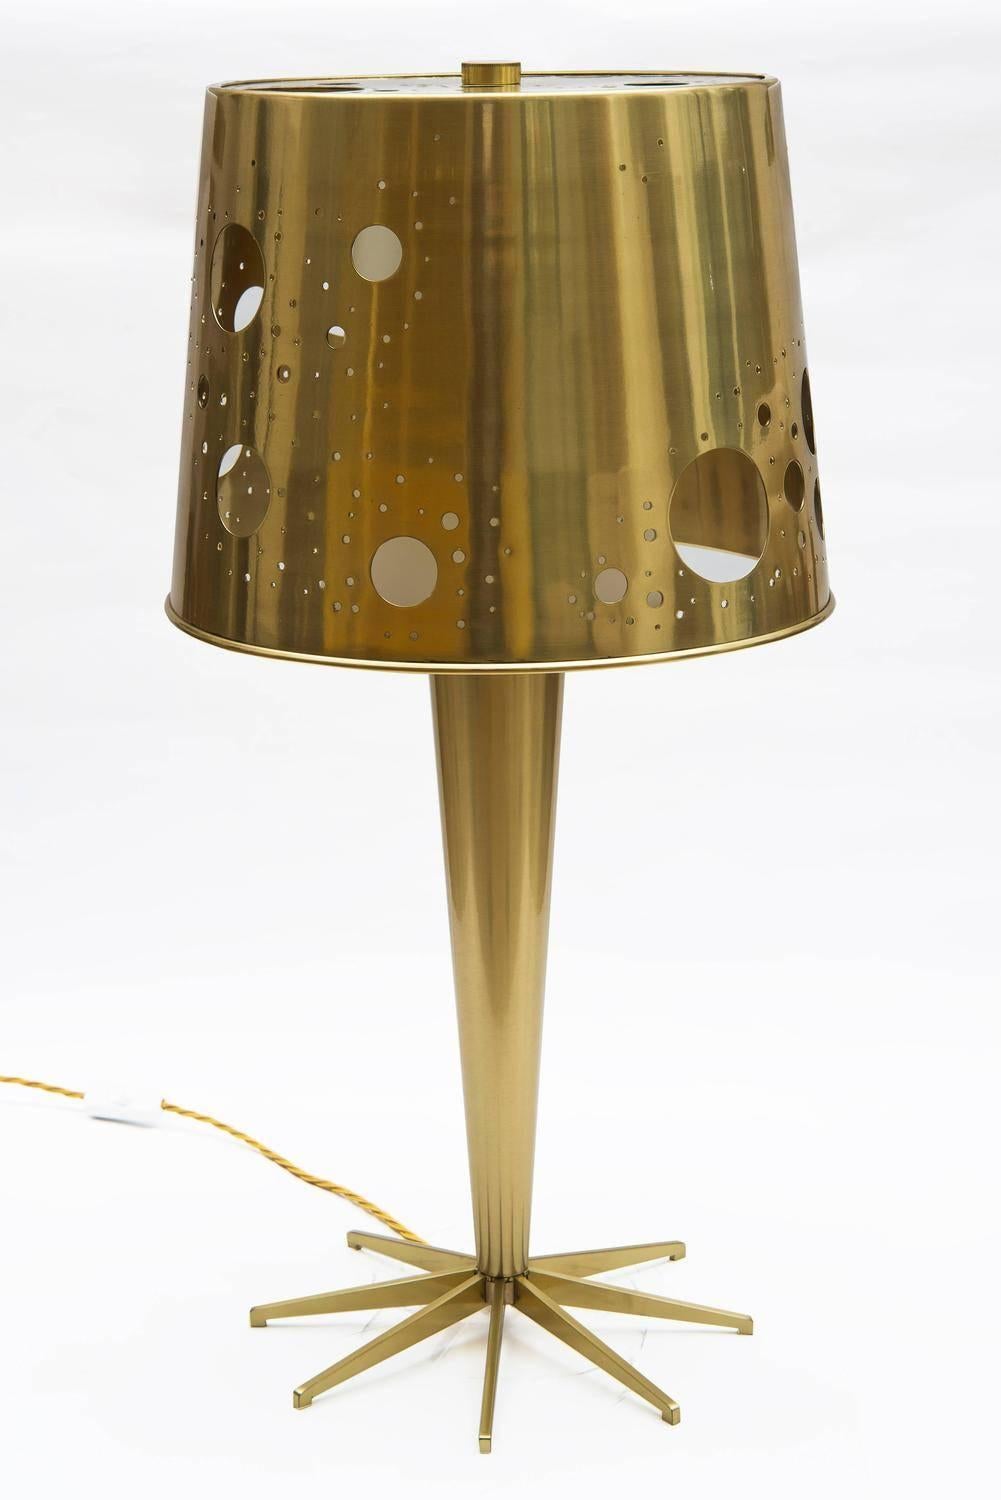 Perforated brass table lamps.
Internal lamp shade in white glass with external lampshade in perforated brass. Signed at base(s).